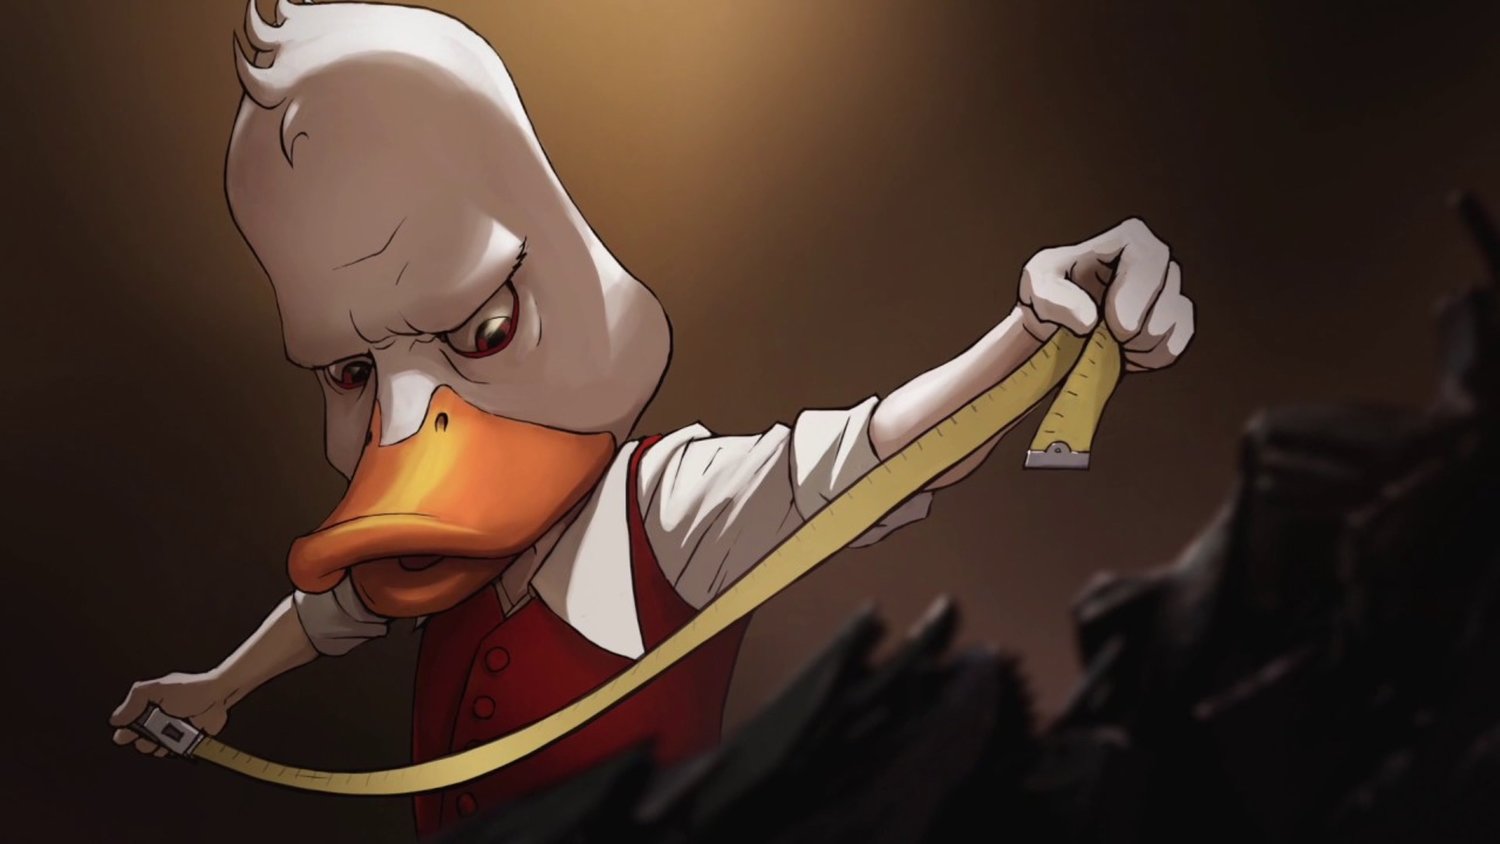 Kevin Smith Talks About His HOWARD THE DUCK Animated Series - "I Get T...